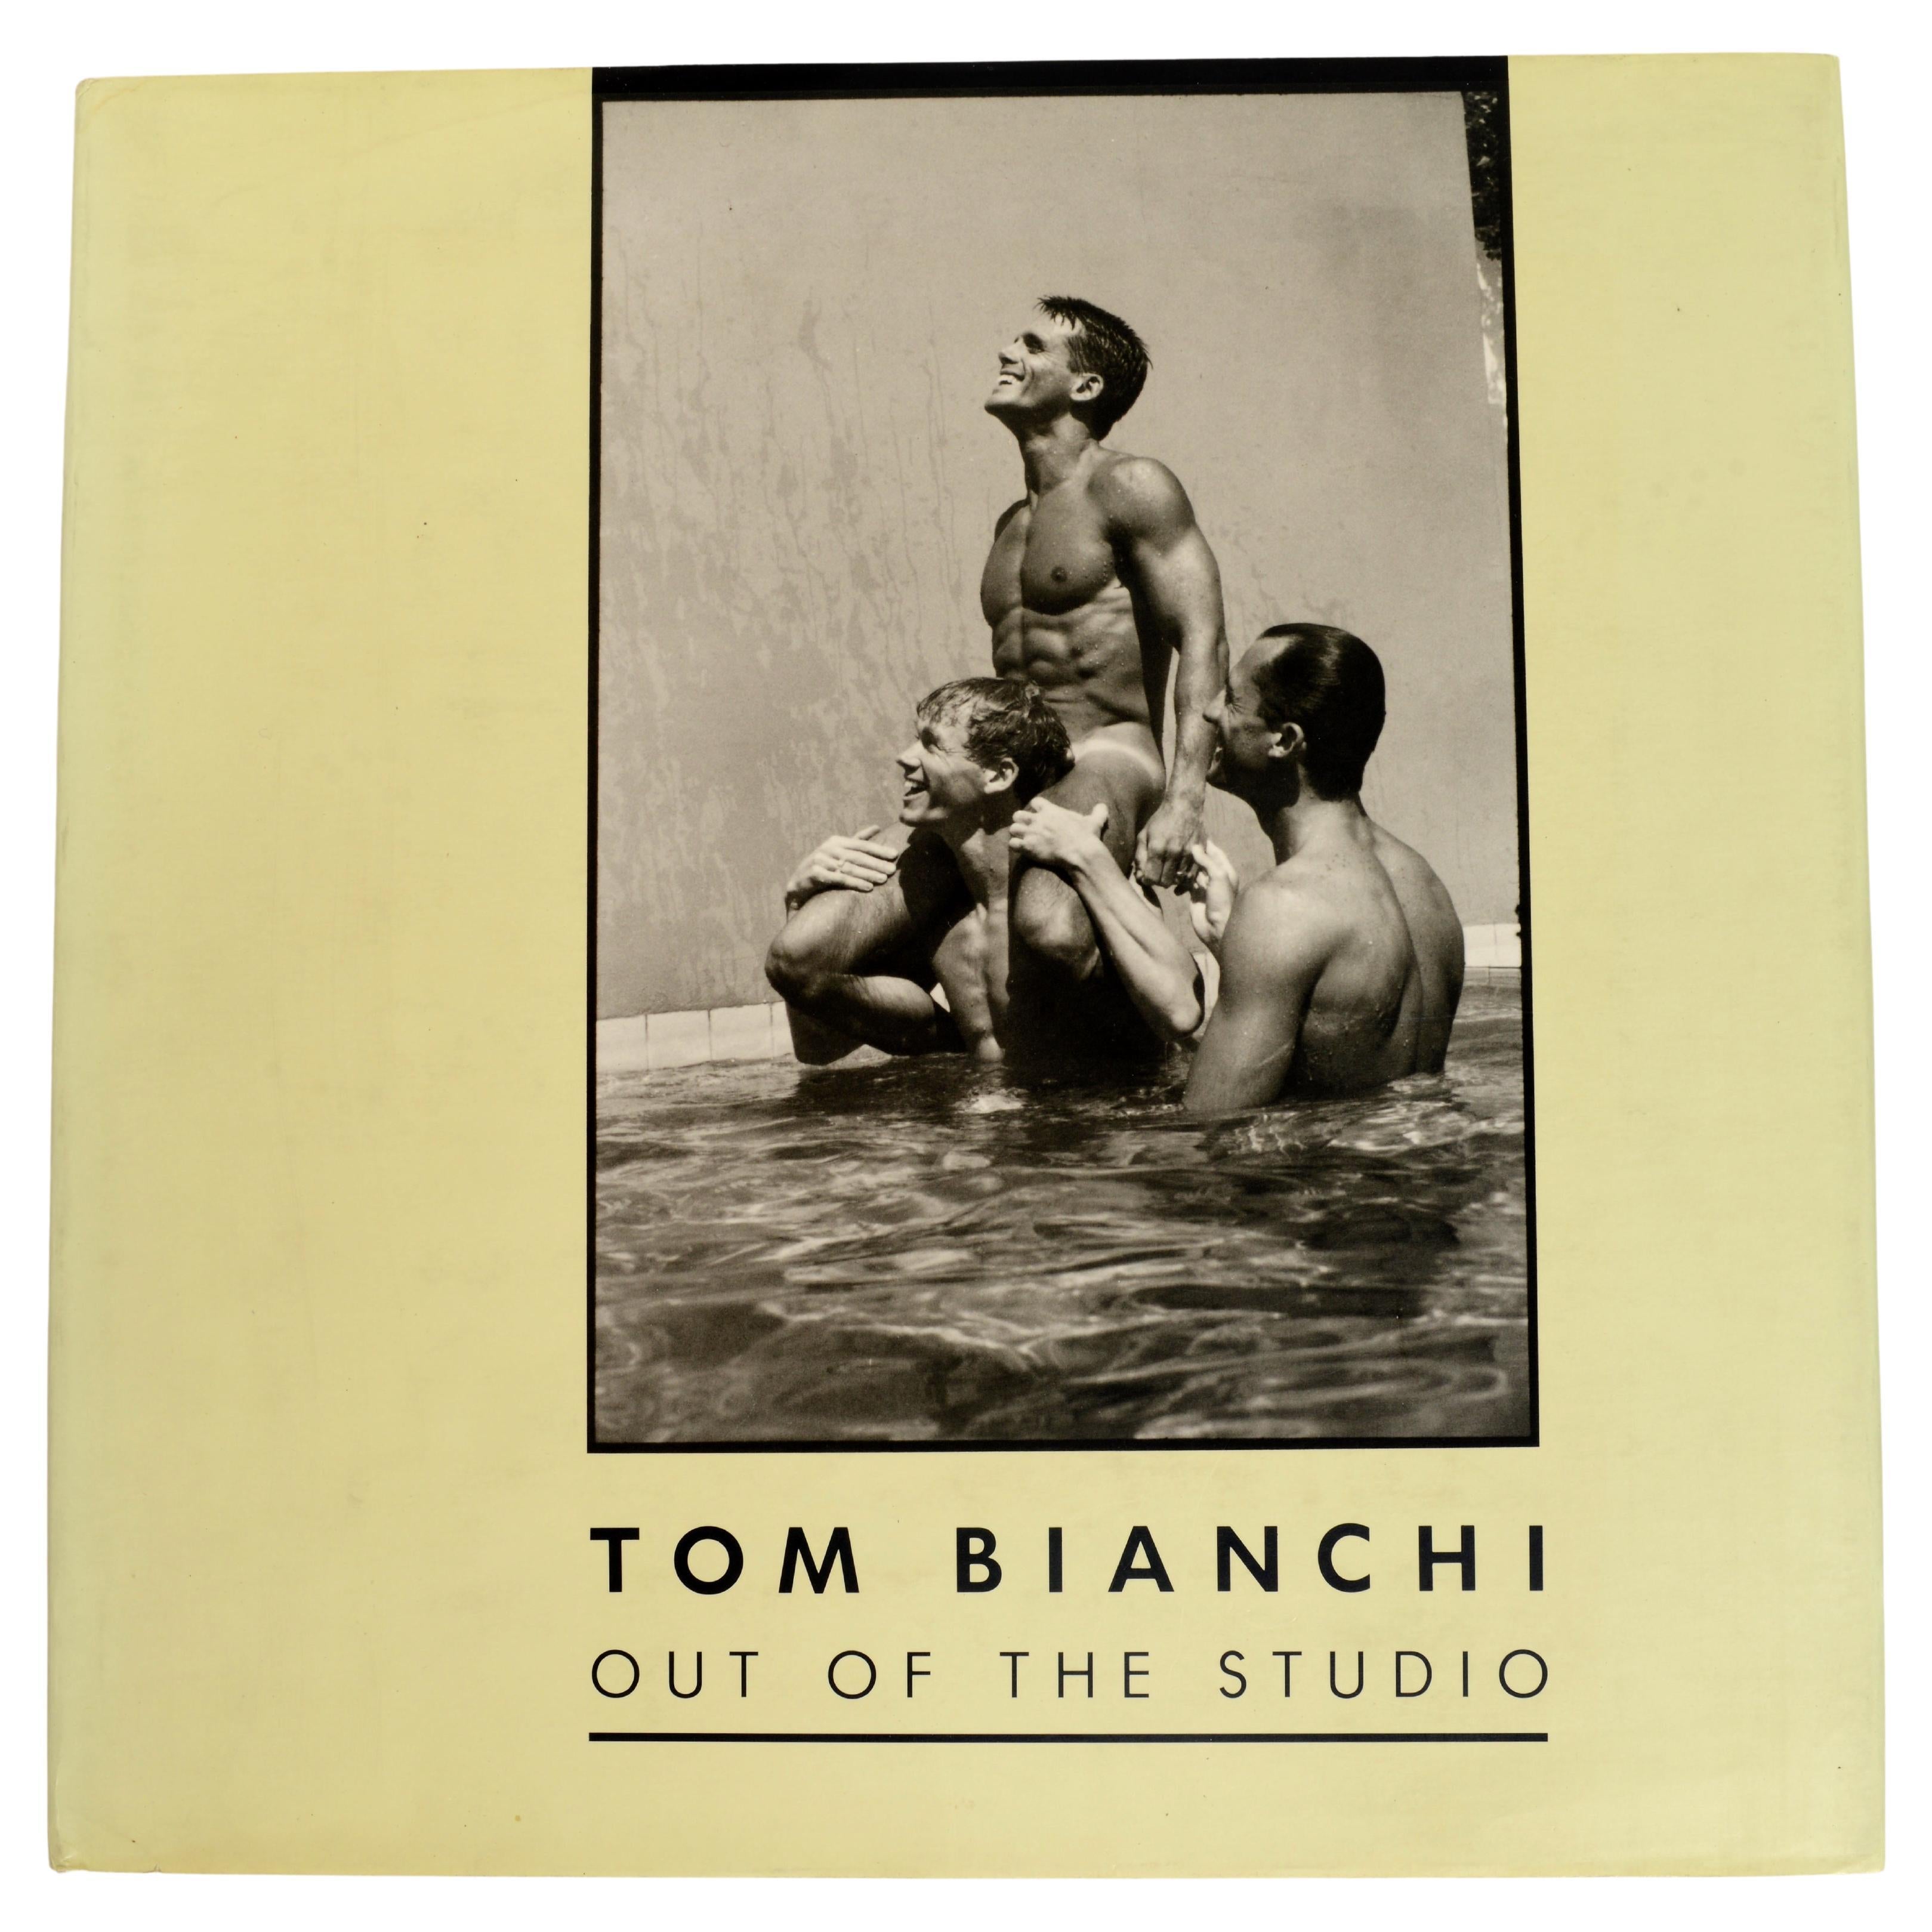 Out of the Studio by Tom Bianchi, Stated 1st Ed For Sale